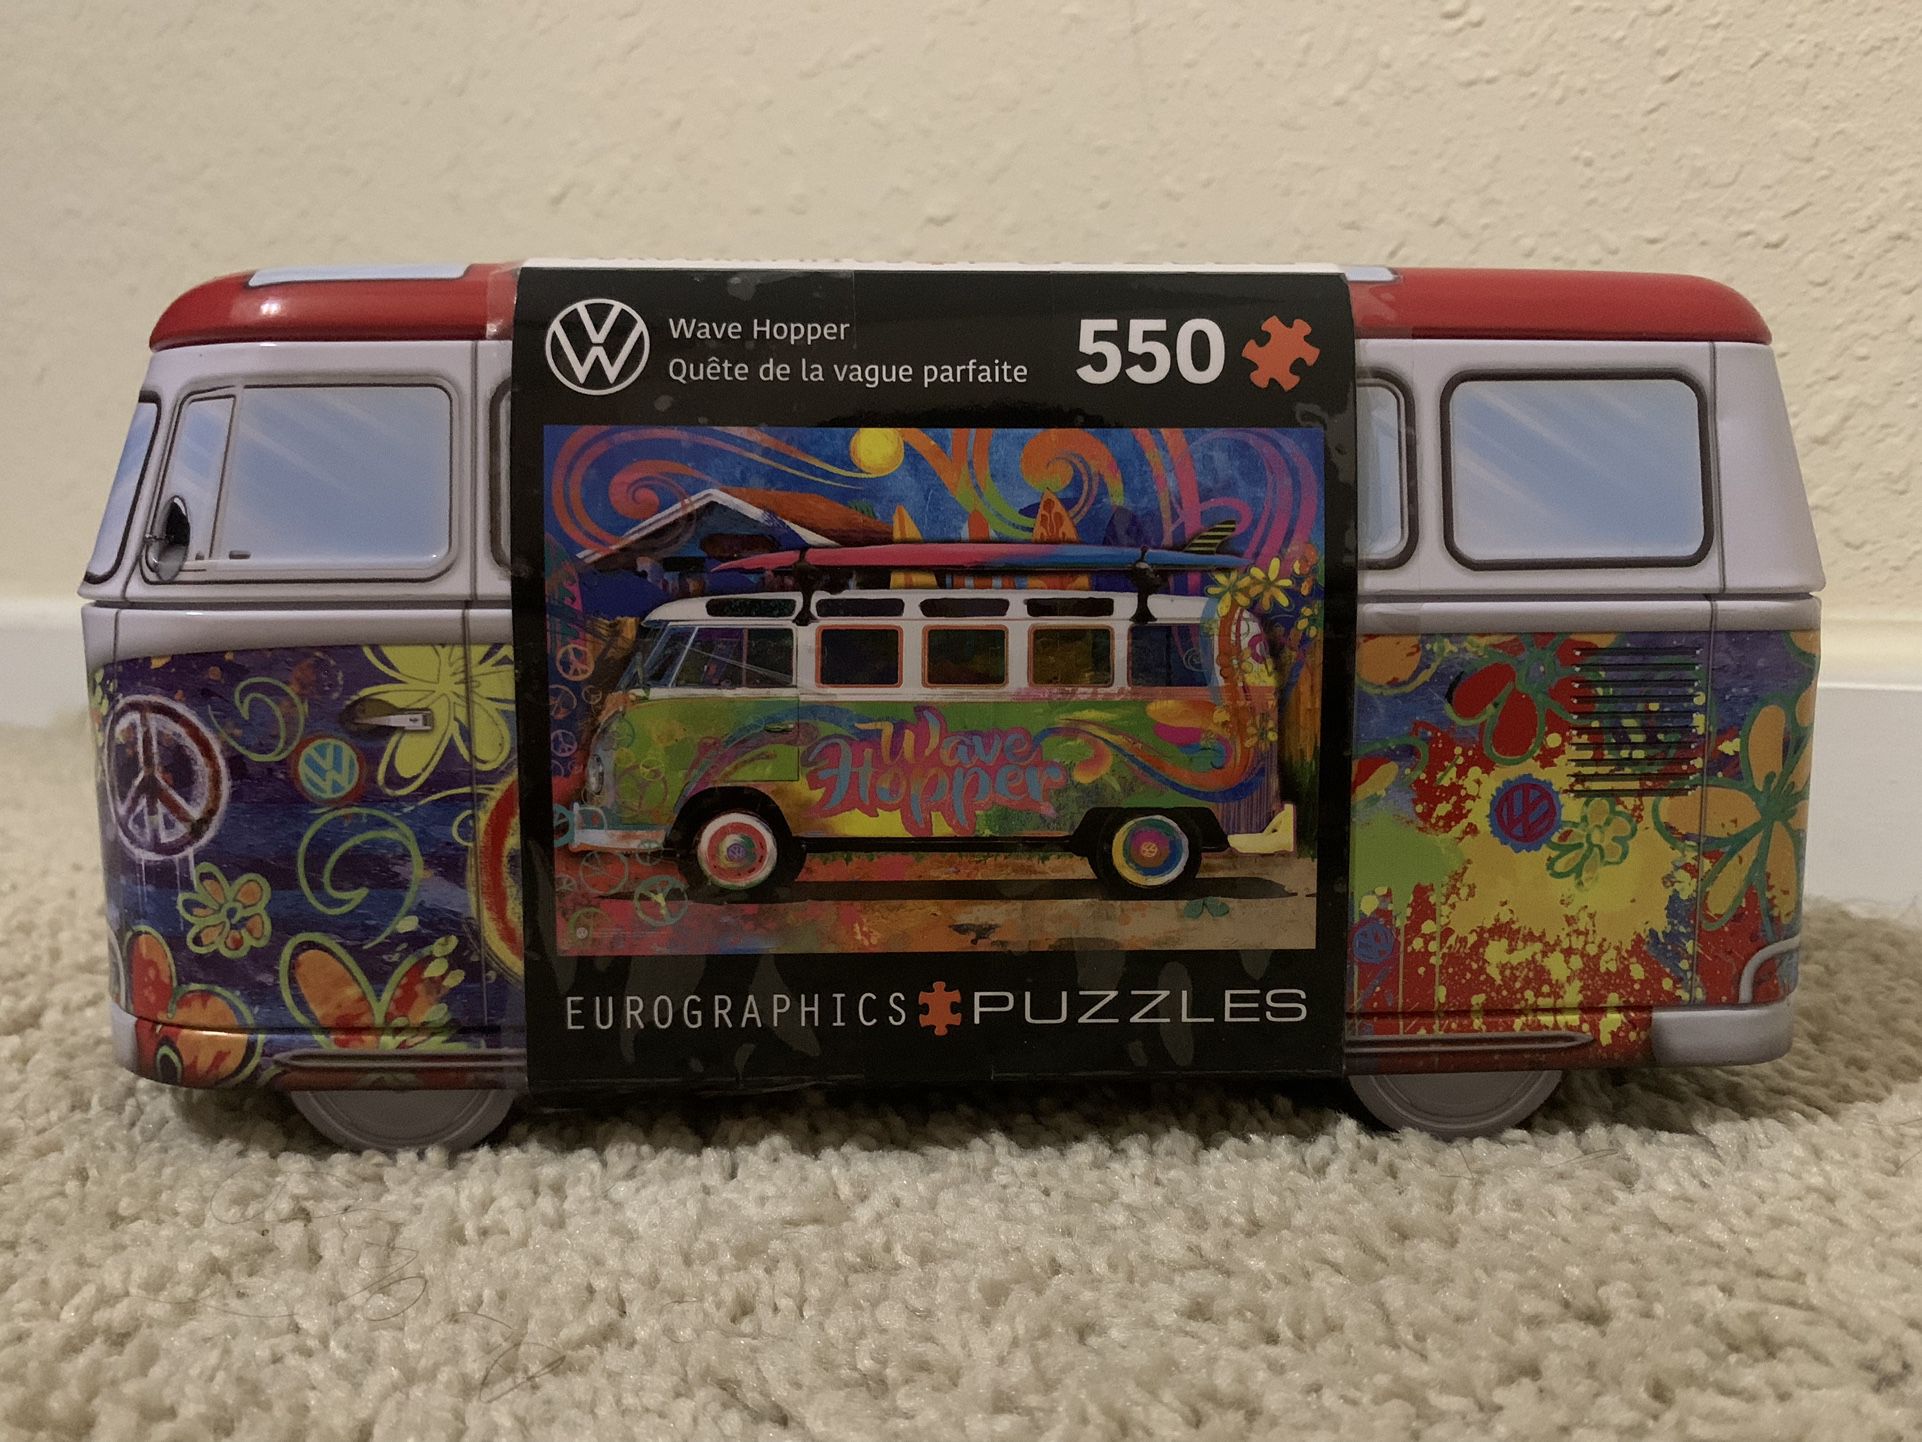 Wave Hopper VW Bus 550 Piece Jigsaw Puzzle Eurographics - BRAND NEW AND SEALED